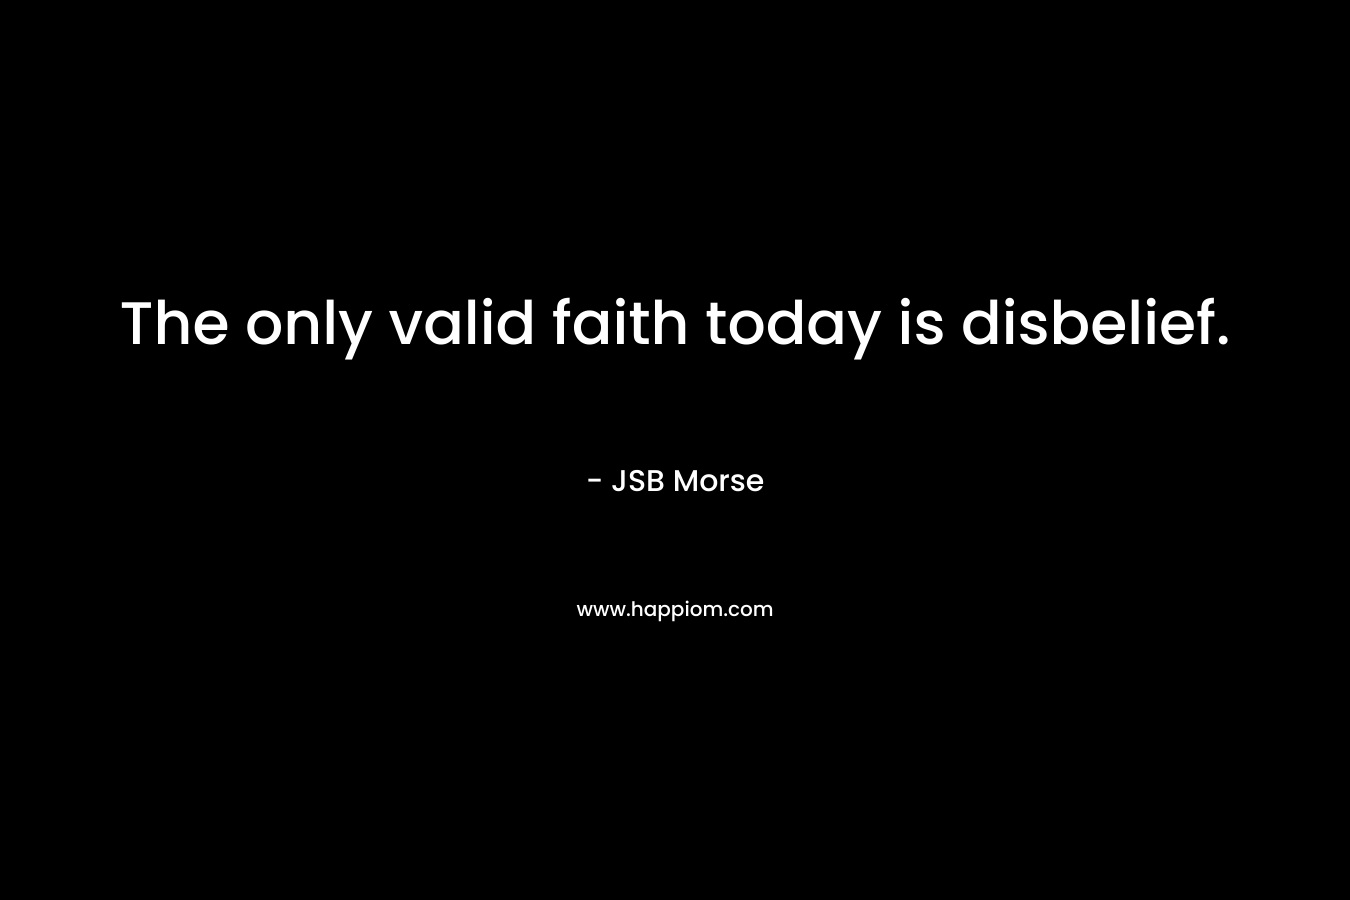 The only valid faith today is disbelief.